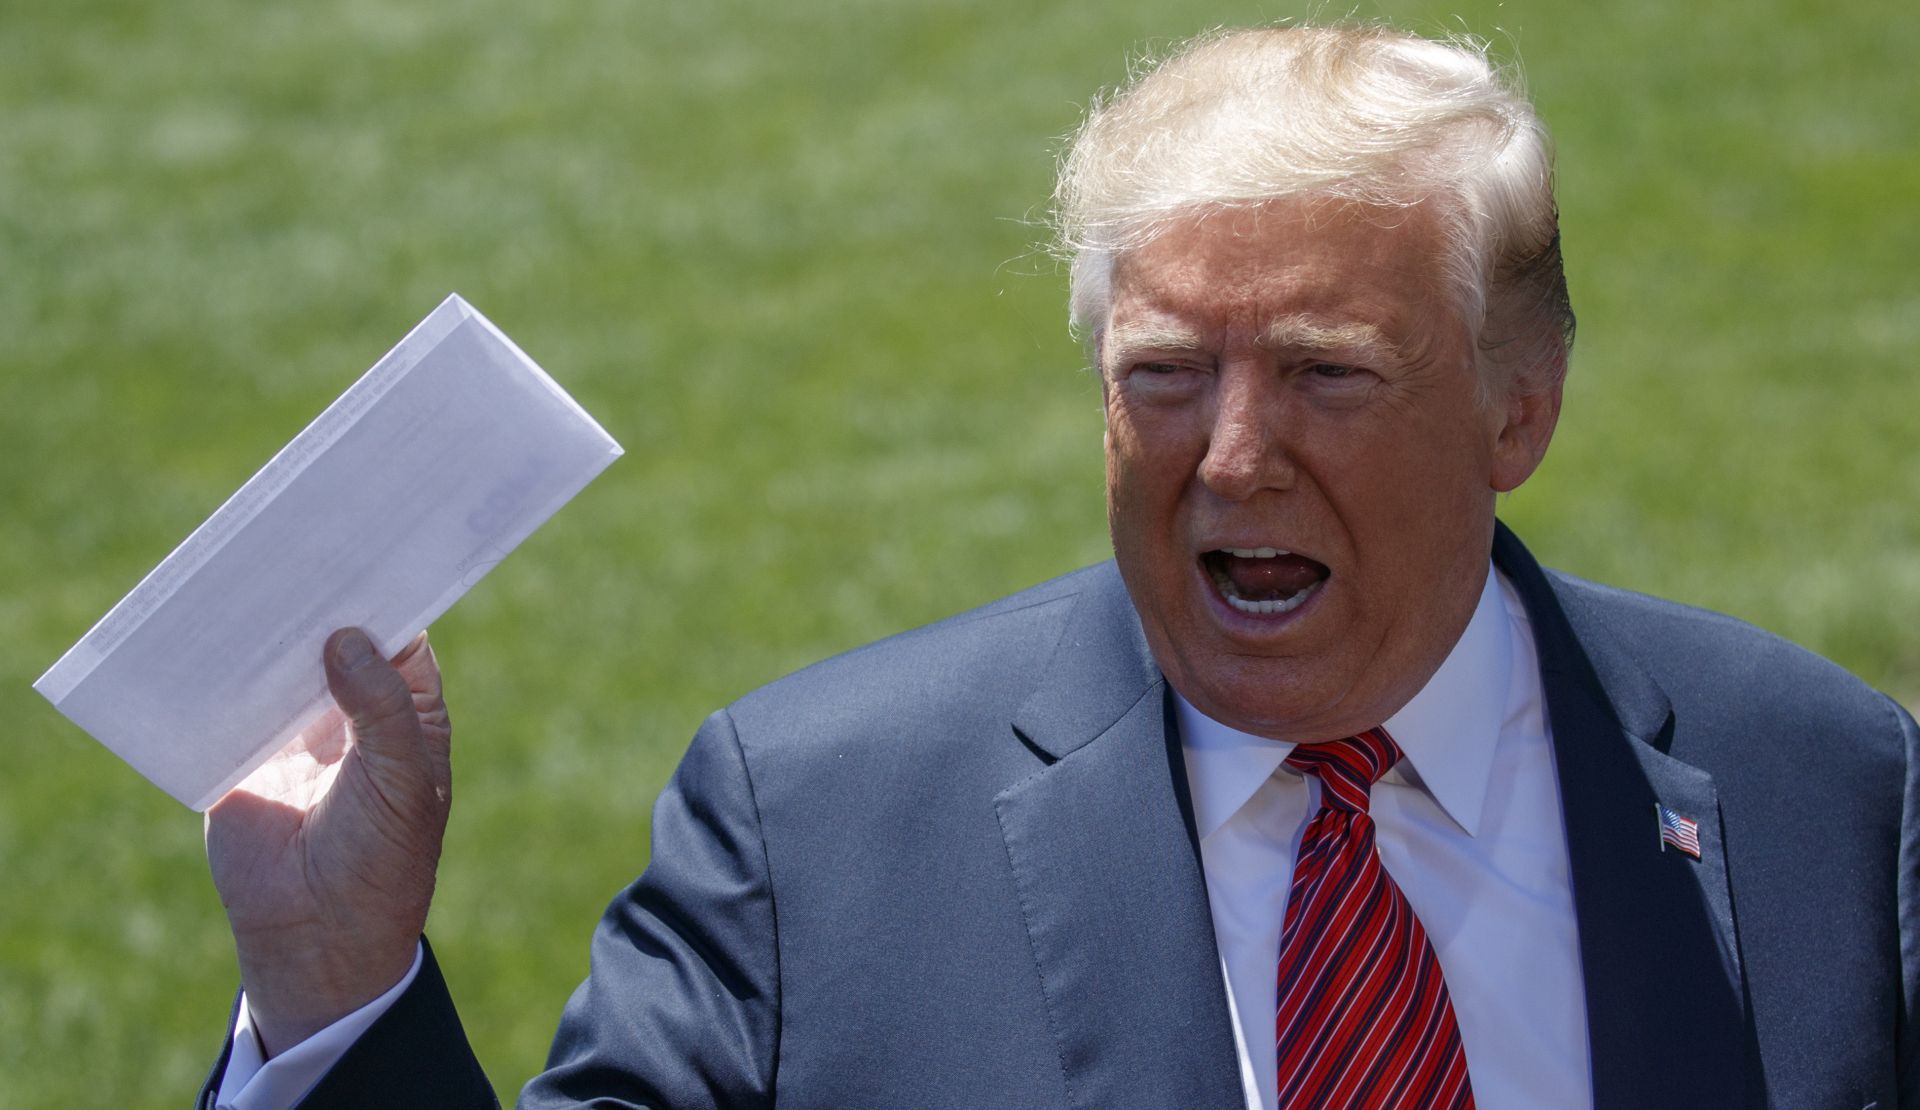 epa07641430 US President Donald J. Trump talks about a page from the USMCA as he responds to a question from the news media on the South Lawn of the White House in Washington, DC, USA, 11 June 2019. President Trump is traveling to Iowa to attend a renewable energy event and the Republican Party of Iowa annual dinner.  EPA/SHAWN THEW